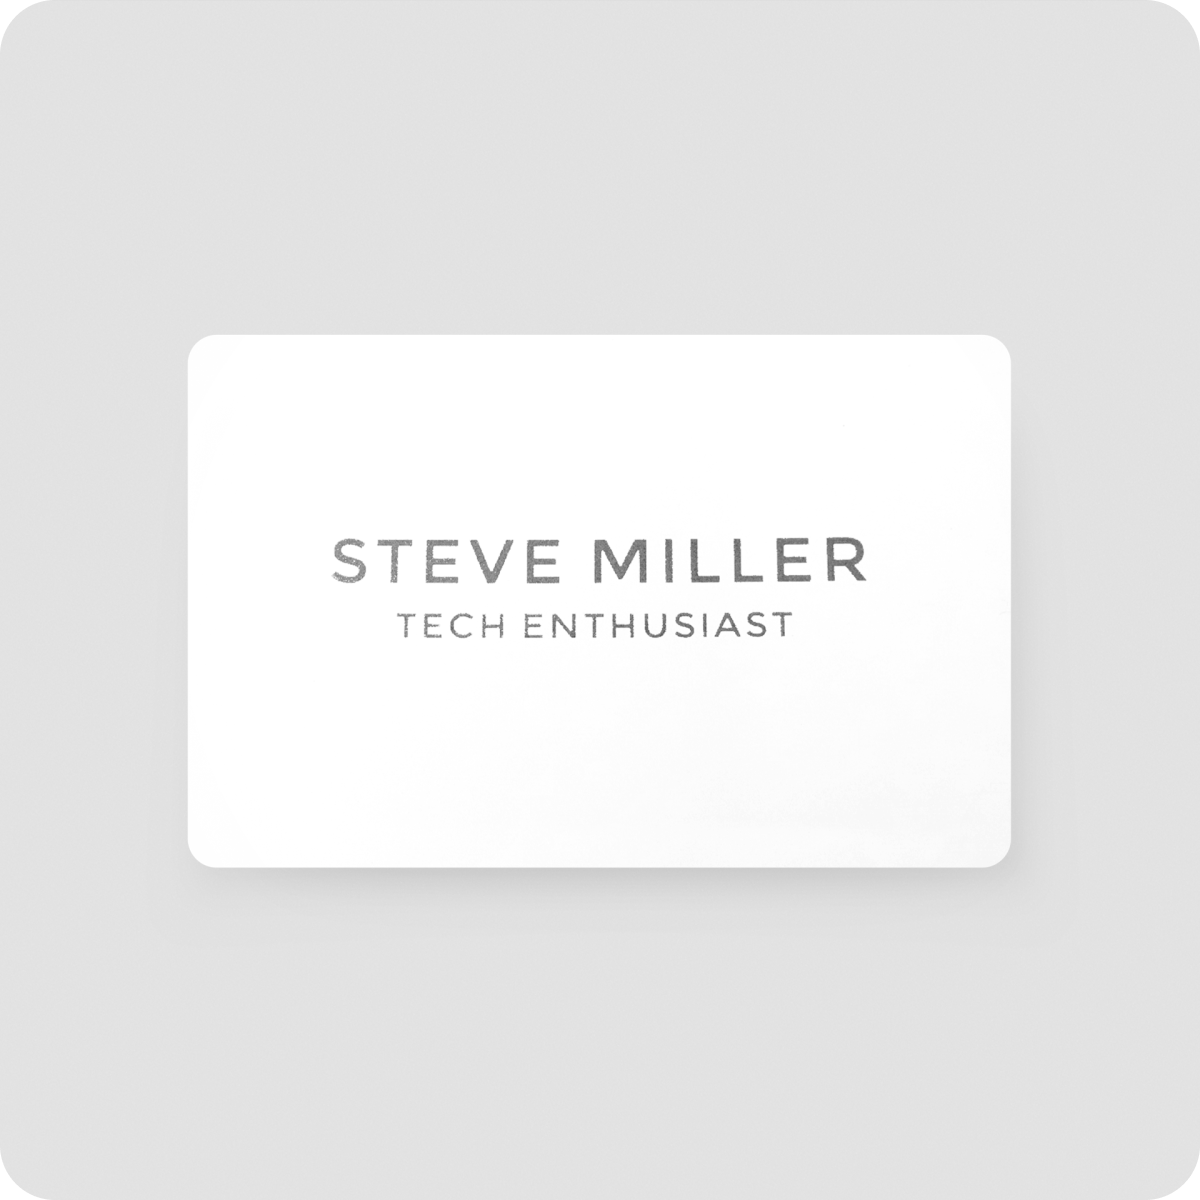 One Good Card: Smart Digital Name Card (Obsidian) - Personalised Near Field Communication (NFC) Digital Business Cards designs.